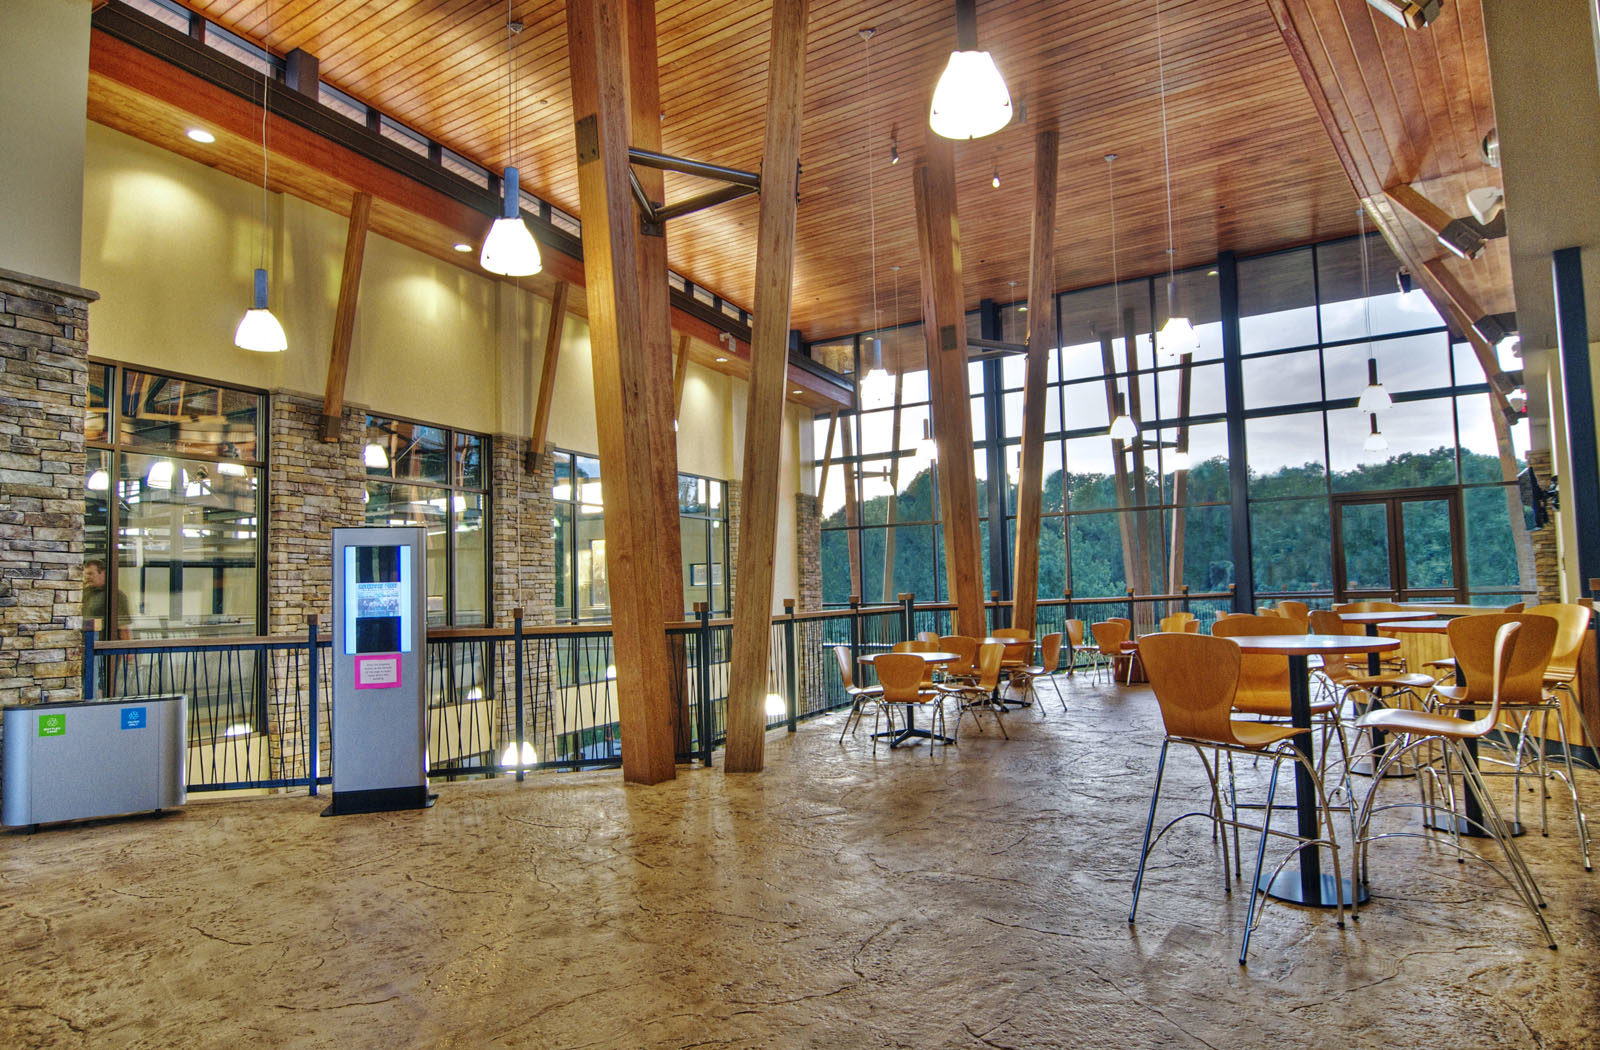 haverford township community recreation and environmental center